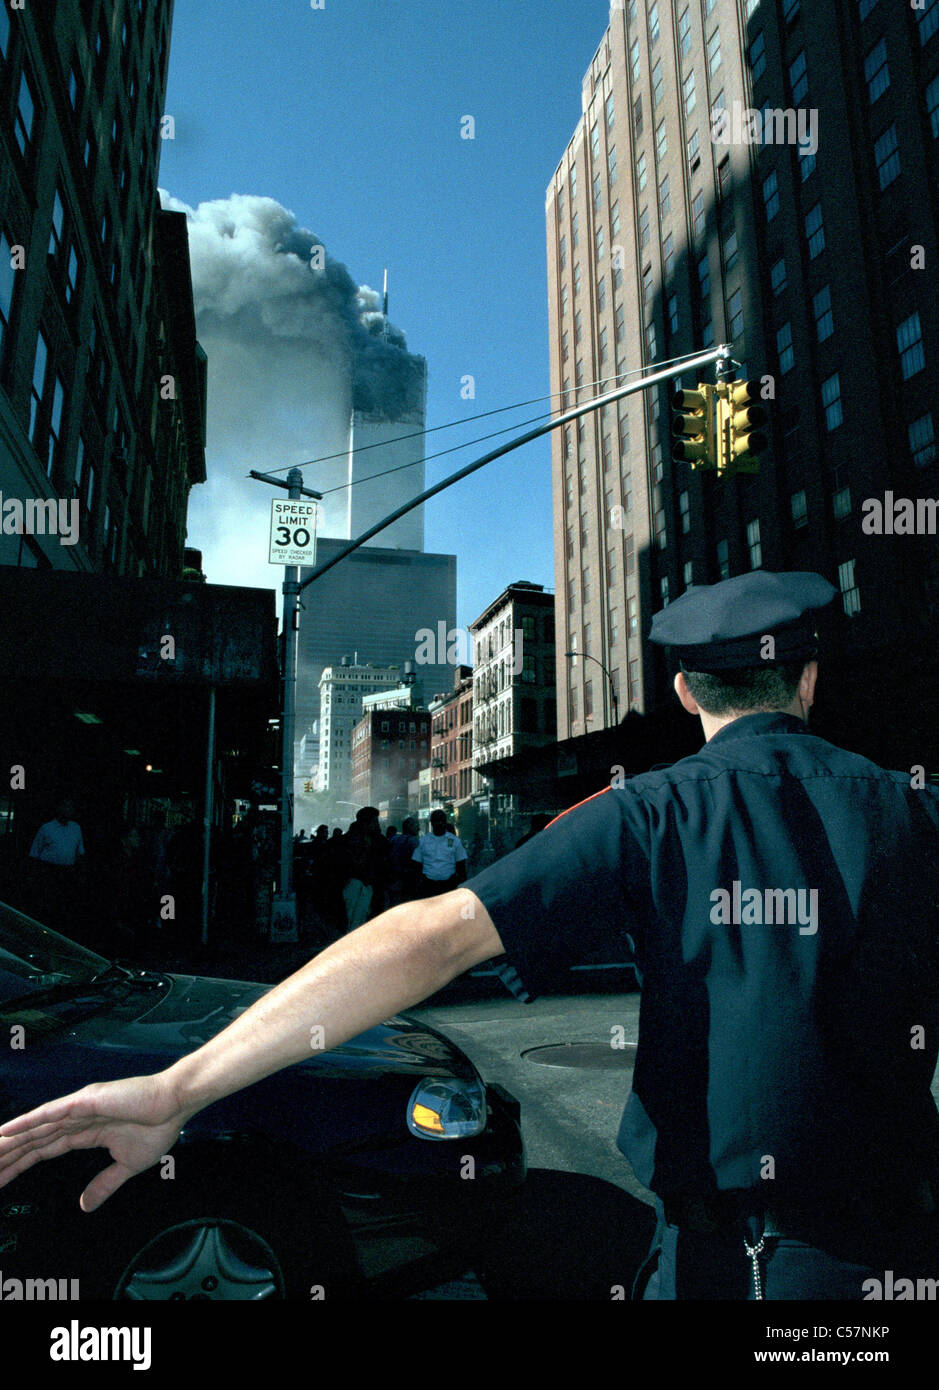 World Trade Center fire/ terrorism September 11, 2001. Police officer directs traffic. (© Frances M. Roberts) Stock Photo